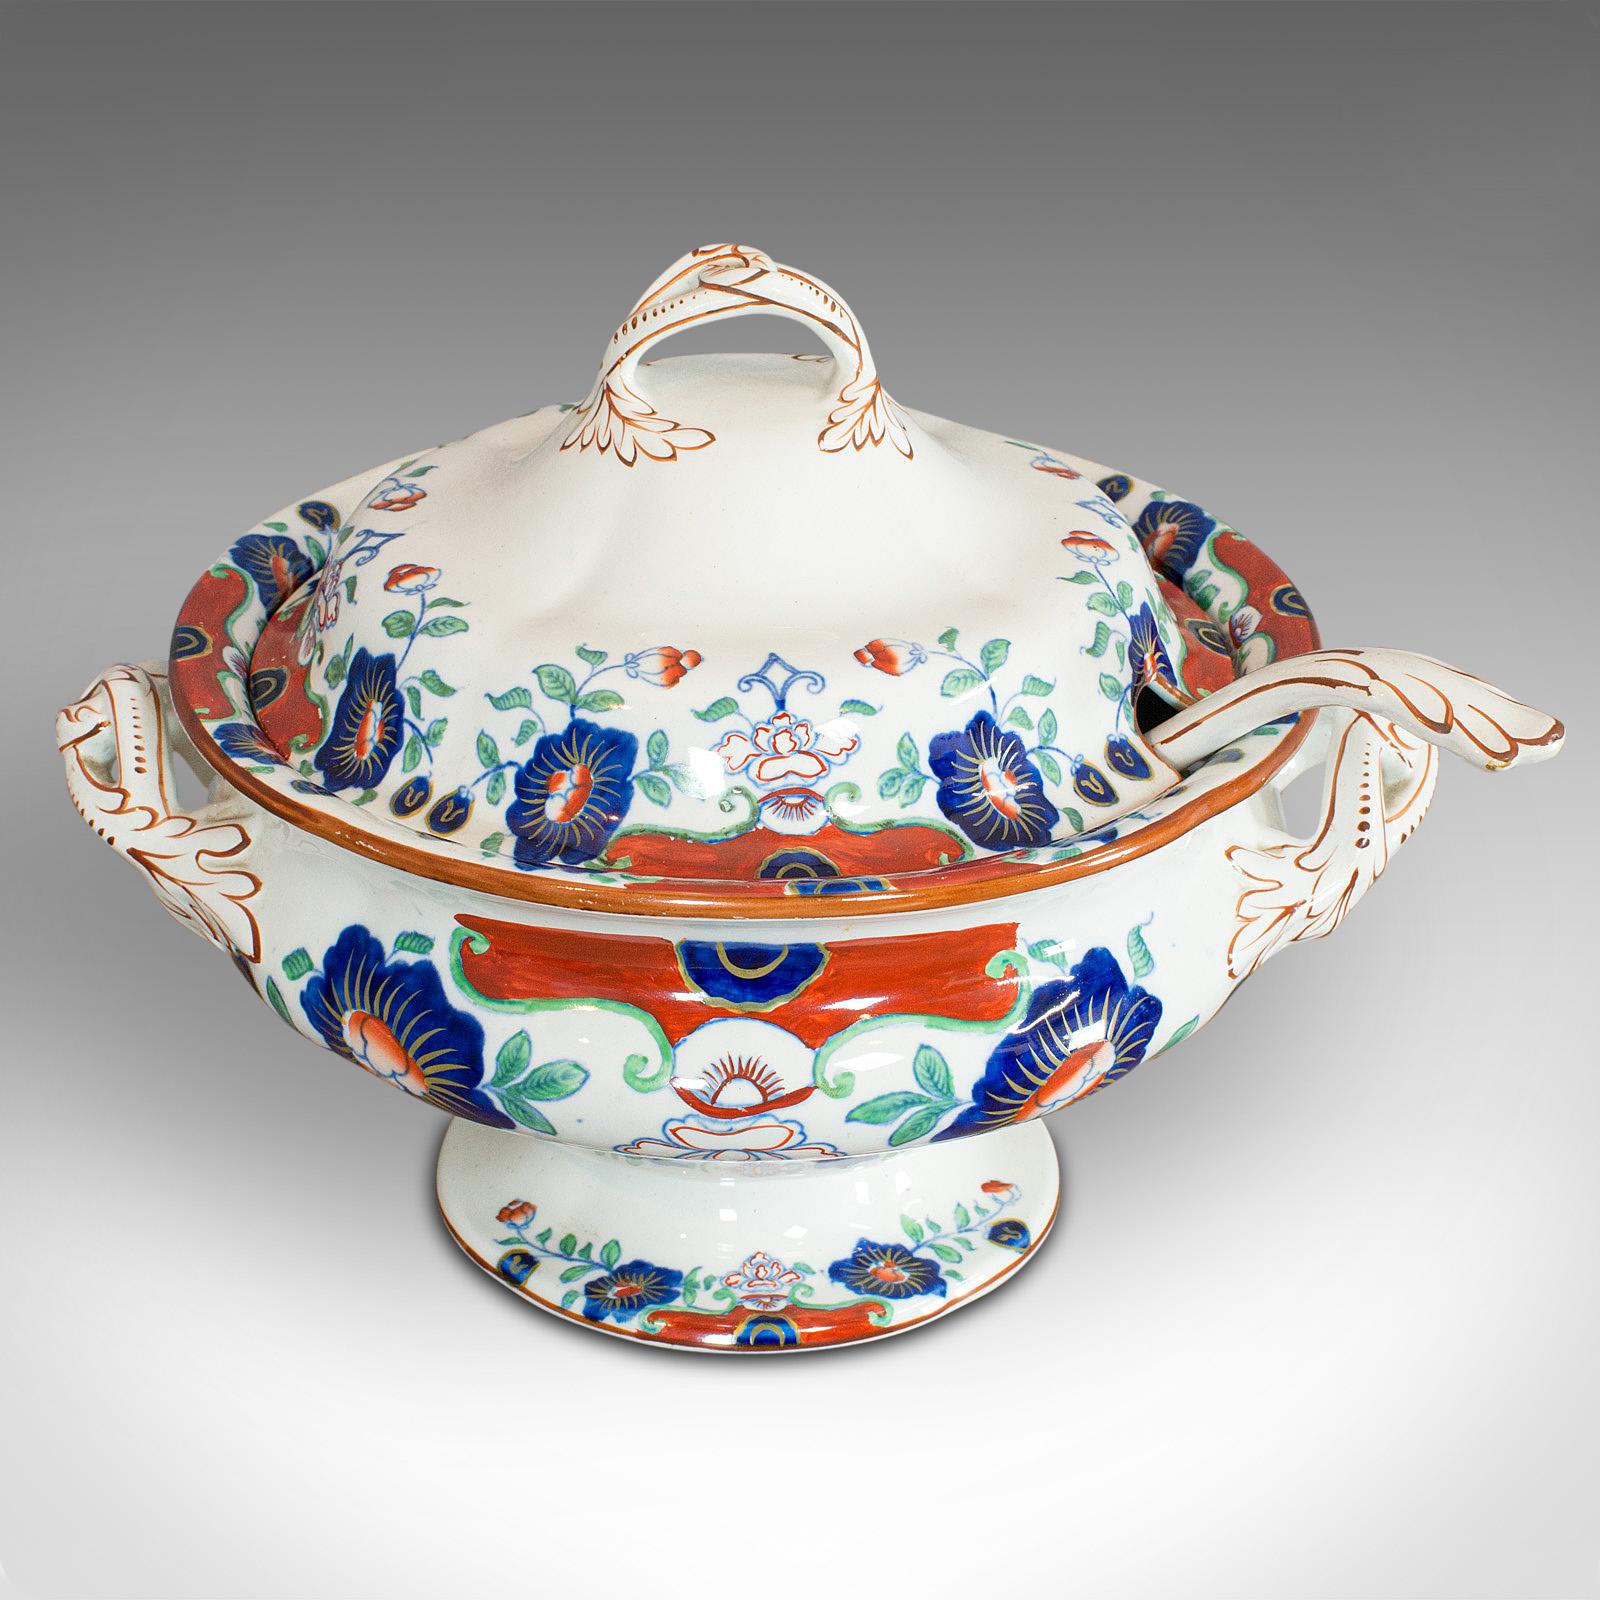 This is a vintage serving set. An English, ironstone soup tureen or cranberry service dish in Art Deco taste, dating to the early 20th century, circa 1930.

Attractive Ironstone service tureens
Displaying a desirable aged patina
Bright, clear